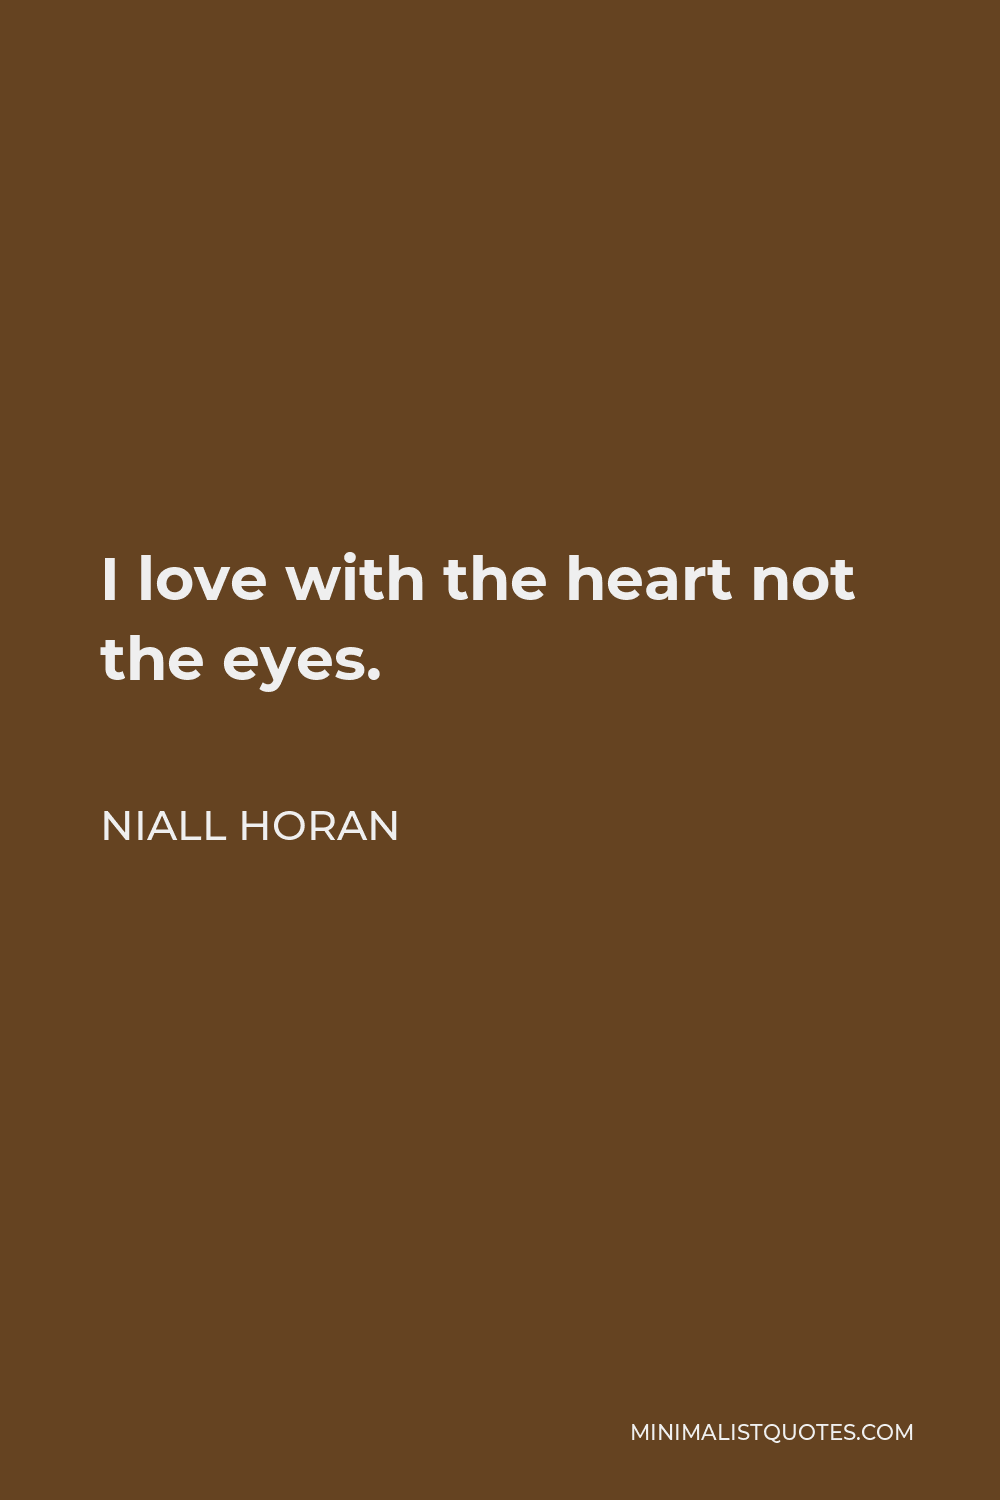 Niall Horan Quote - I love with the heart not the eyes.